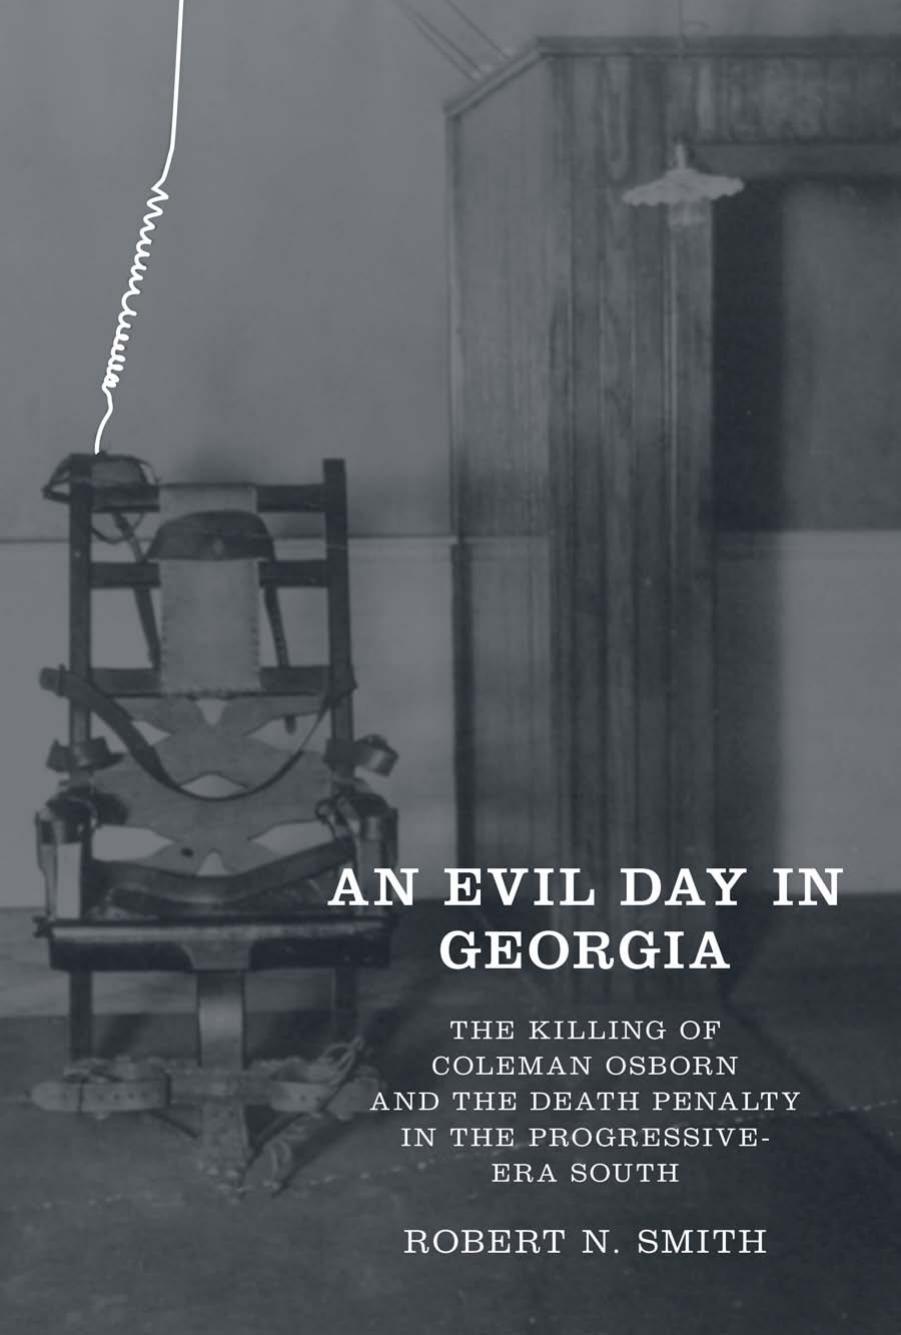 An Evil Day in Georgia : The Killing of Coleman Osborn and the Death Penalty in the Progressive-Era South by Robert Neil Smith